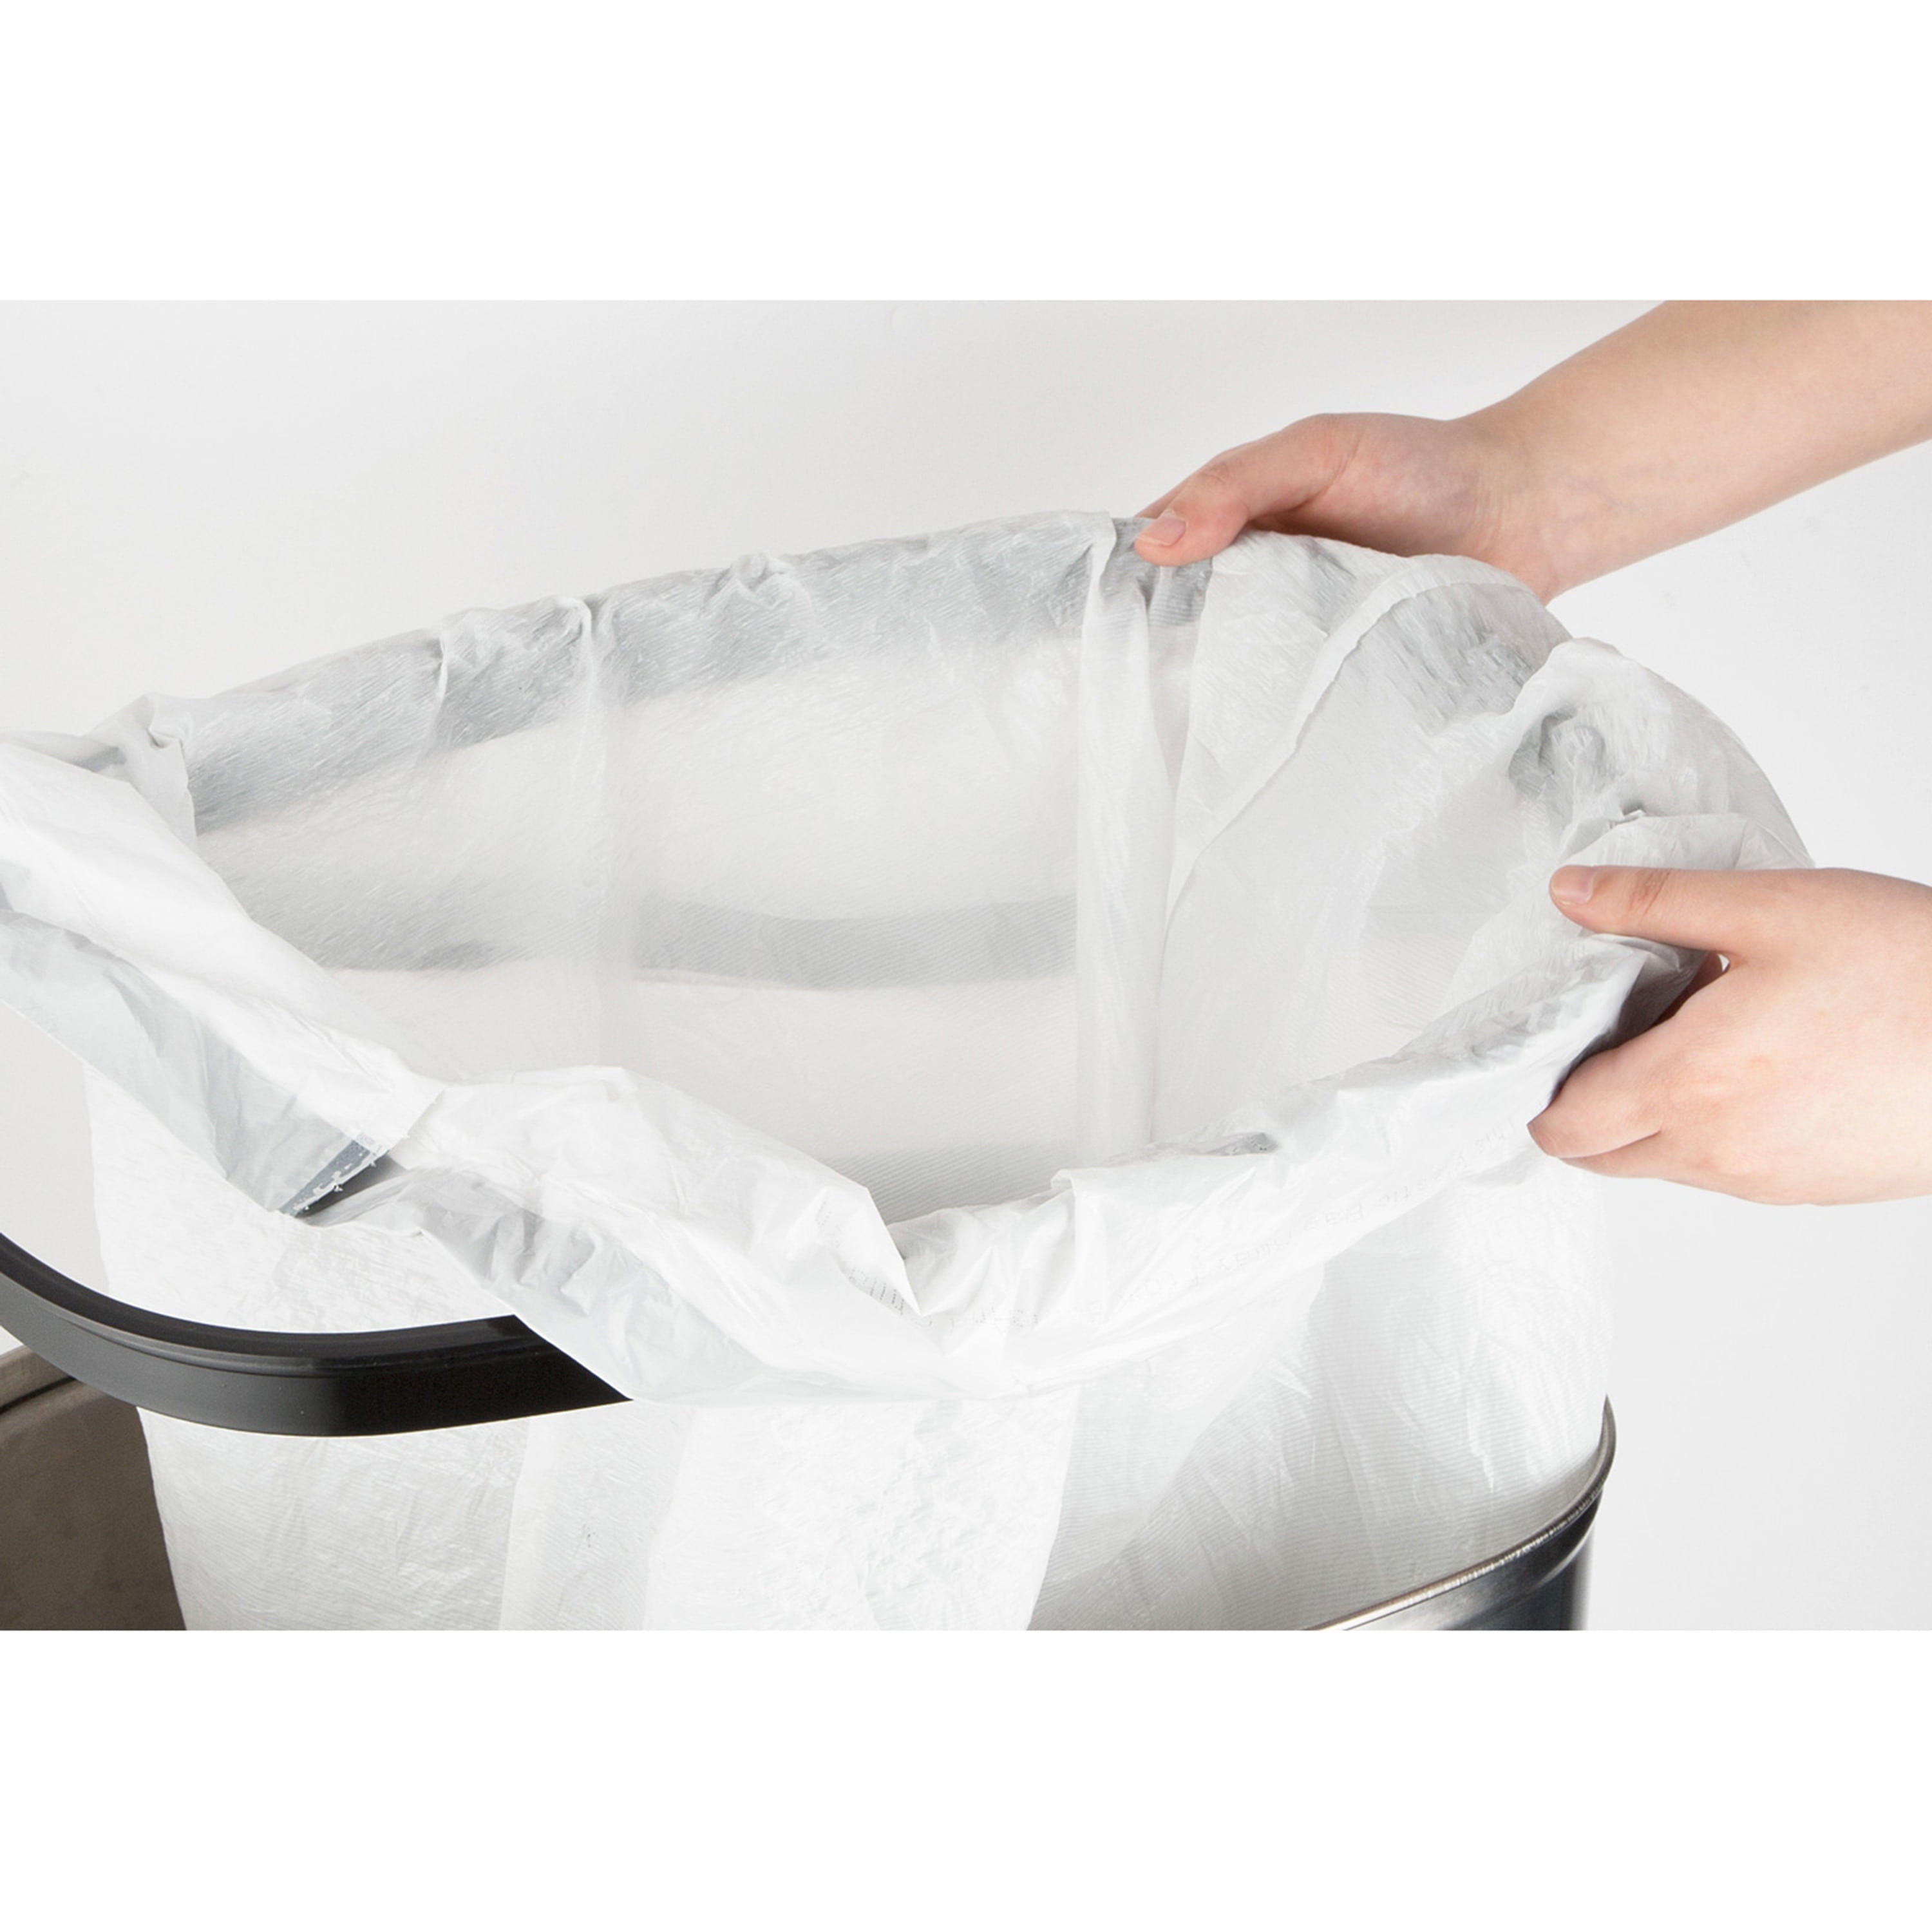 Nine Stars 21 Gallon White Trash Bags 45 Count - New (Packaging May Vary)